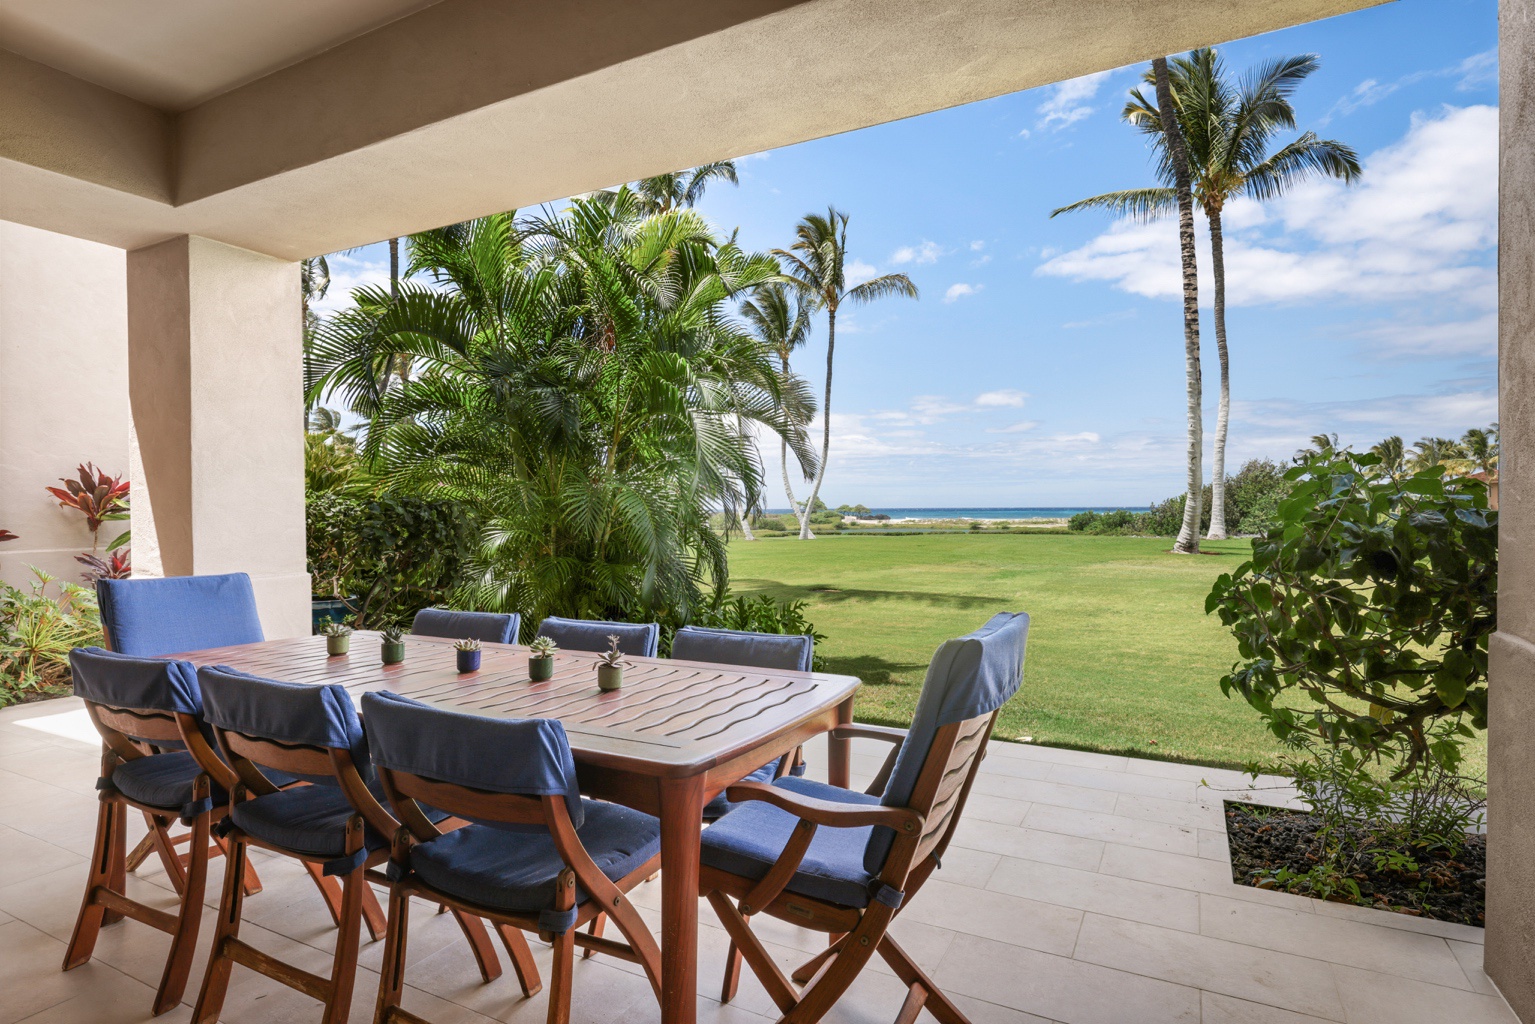 Kailua Kona Vacation Rentals, 3BD Golf Villa (3101) at Four Seasons Resort at Hualalai - Al fresco dining seating for six on your lanai at the prime and coveted golf villa location with expansive views.